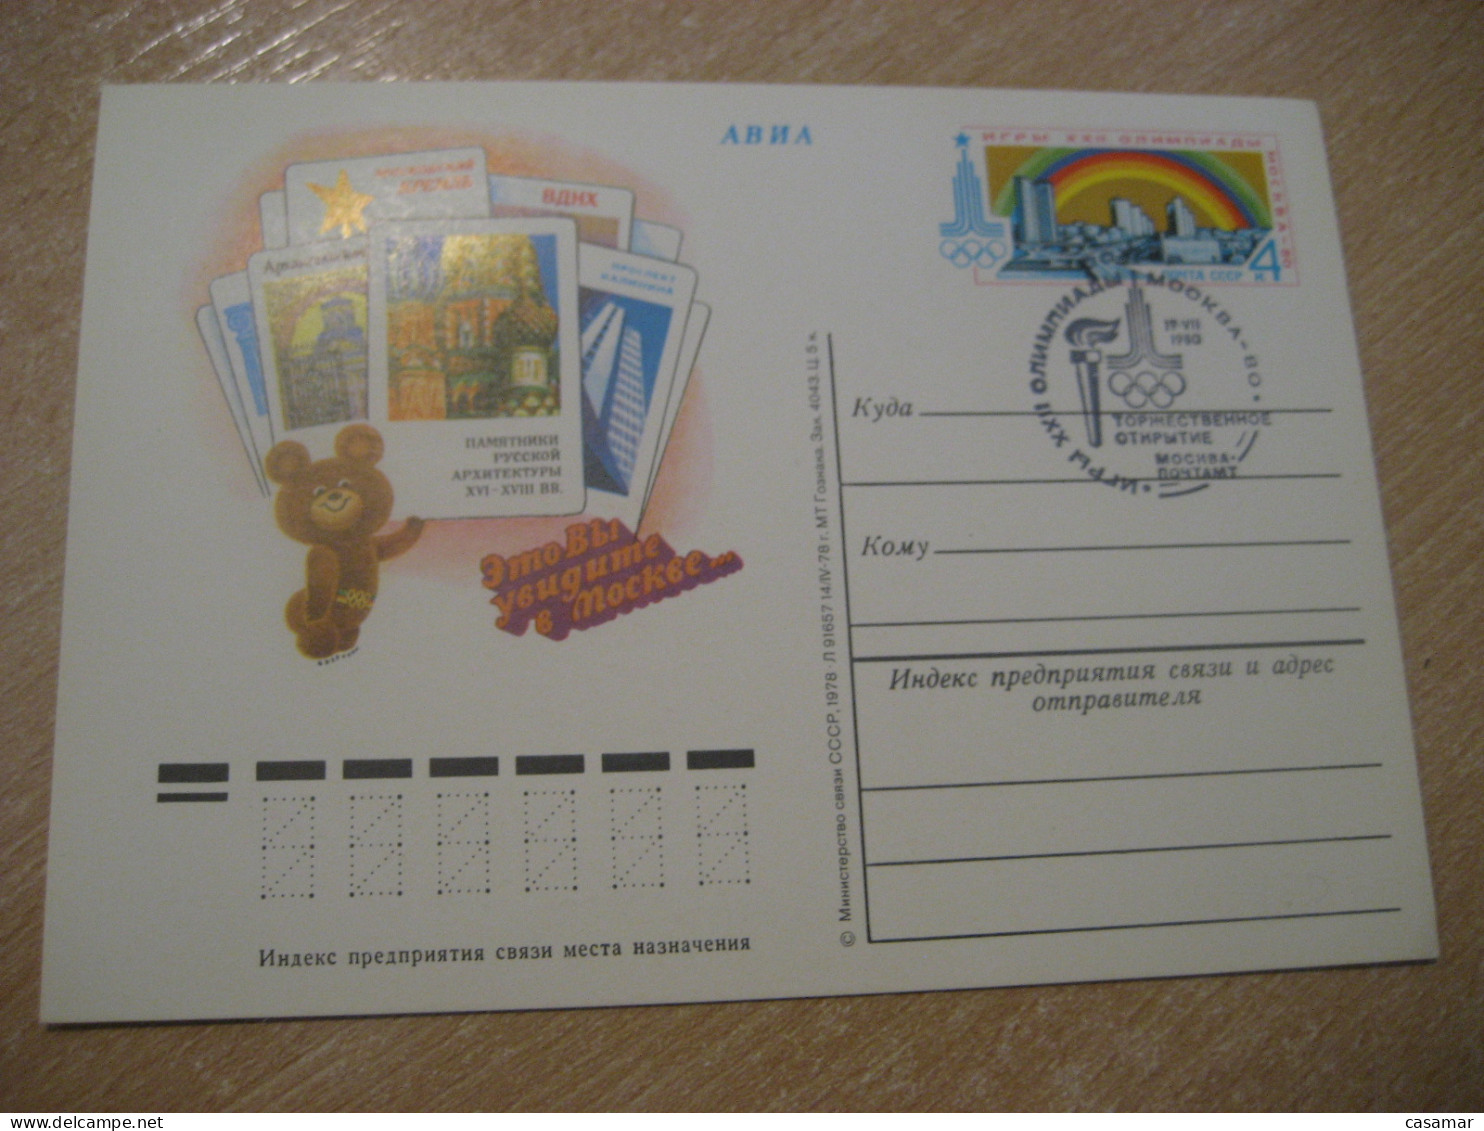 1980 Olympic Mascot Moscow Olympic Games Olympics Torch Cancel Postal Stationery Card RUSSIA USSR - Zomer 1980: Moskou